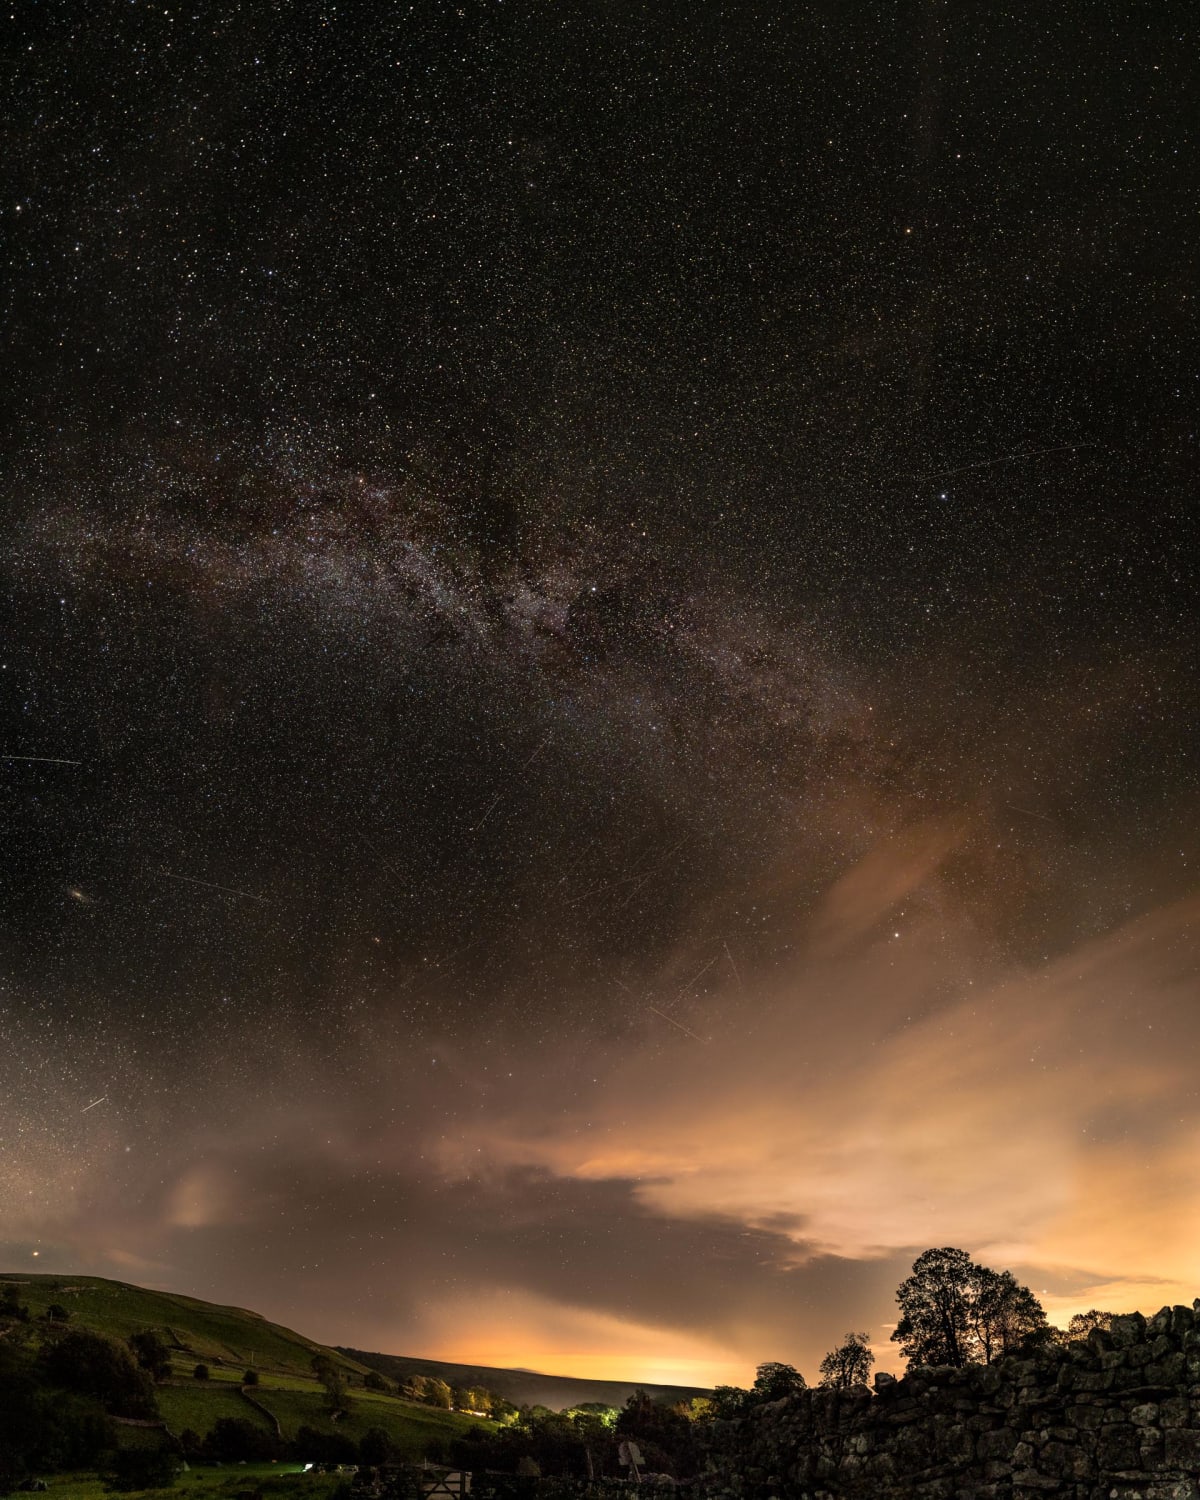 My first successful Milky Way photograph over Malham, Yorkshire